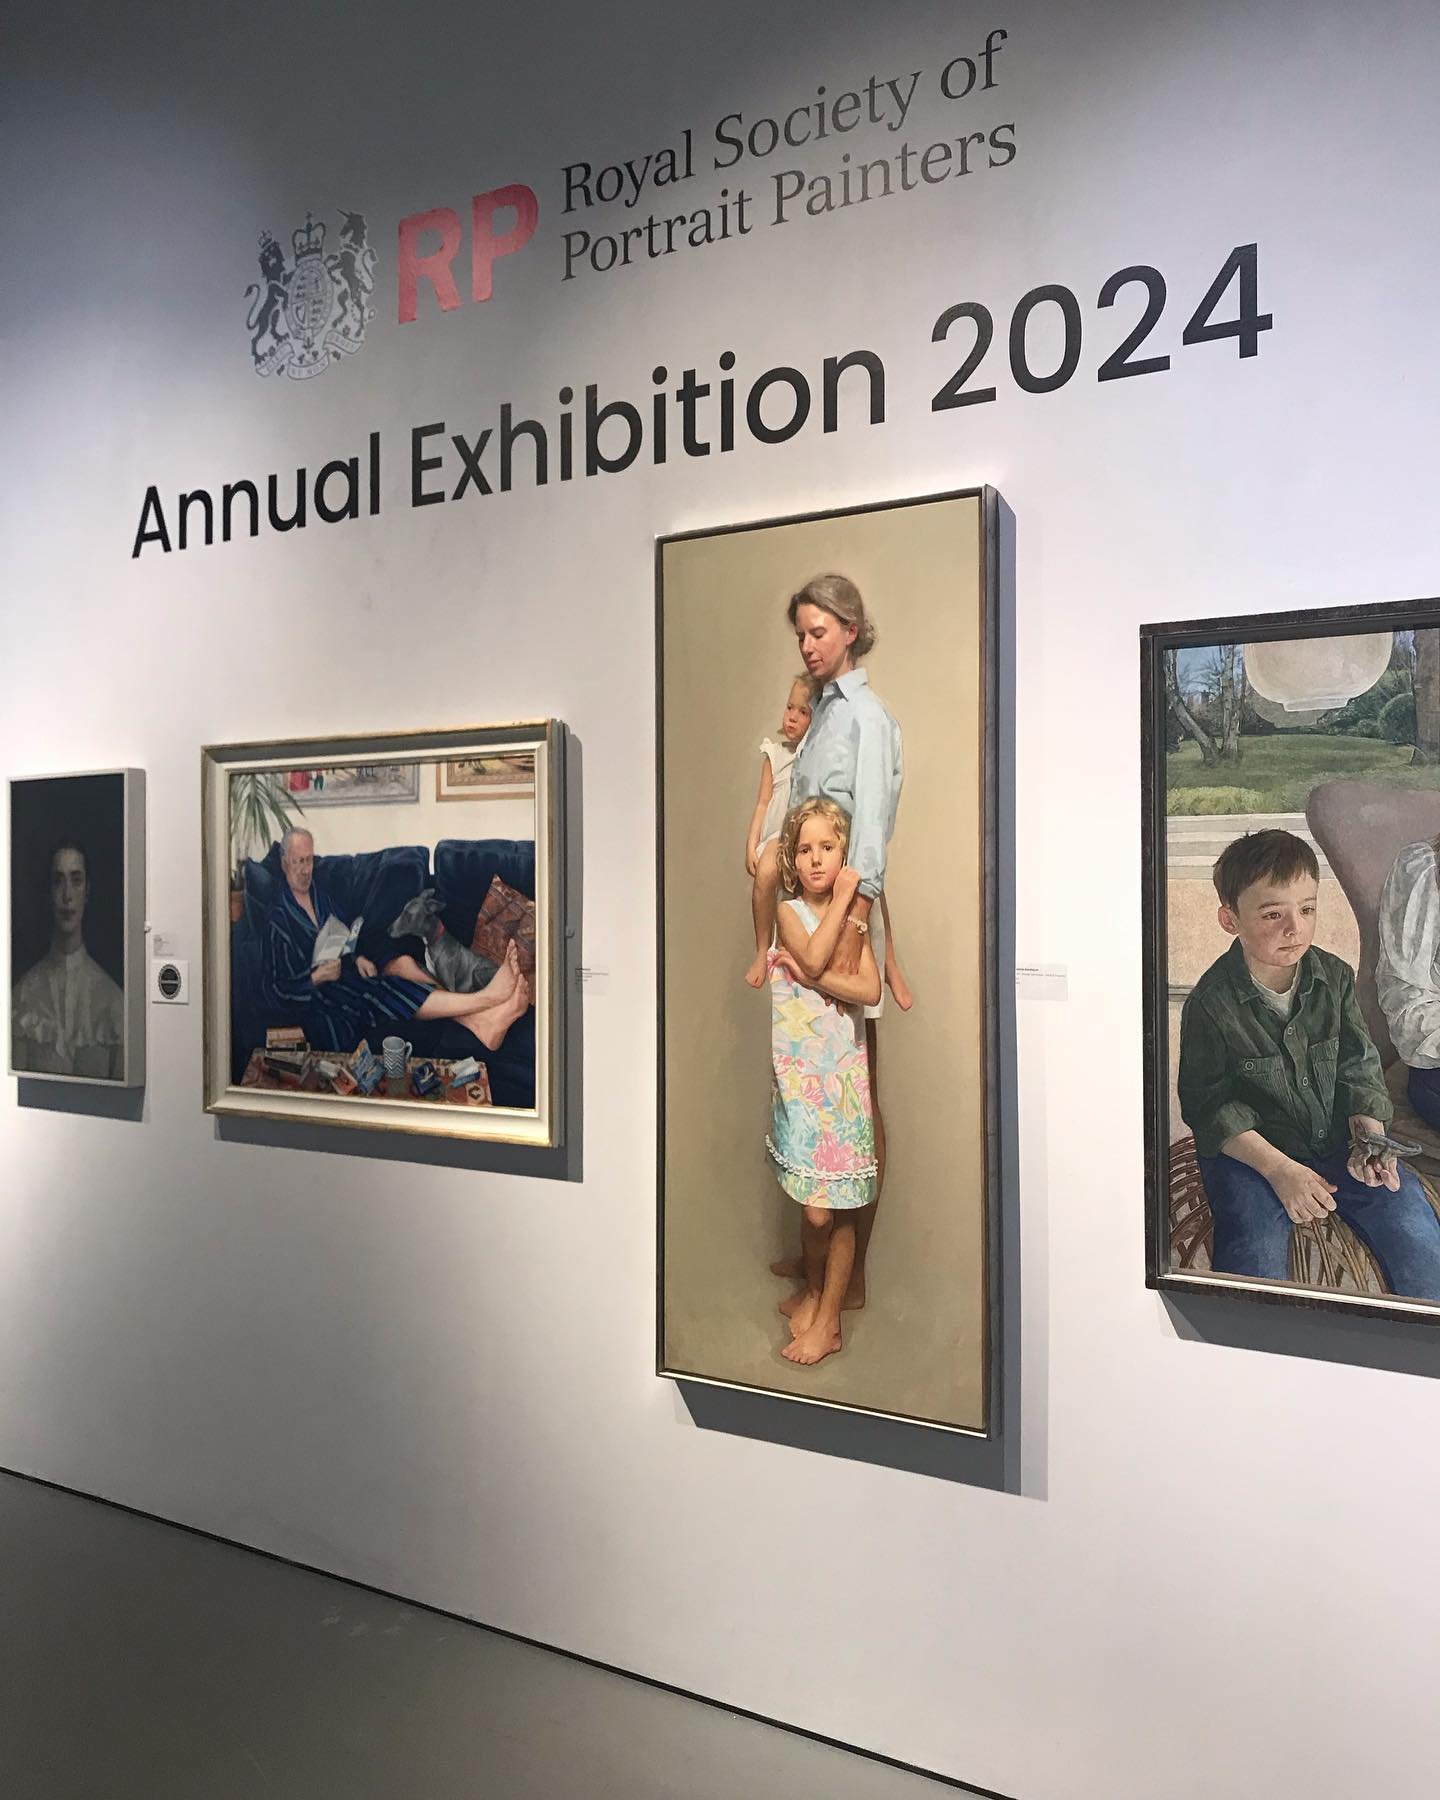 Went to see the @royalsocietyportraitpainters annual show @mallgalleries last week, excellent as always, I was preselected this year - so came close but no cigar.
Too many fantastic paintings to include, but here are just a few of my favourites&helli